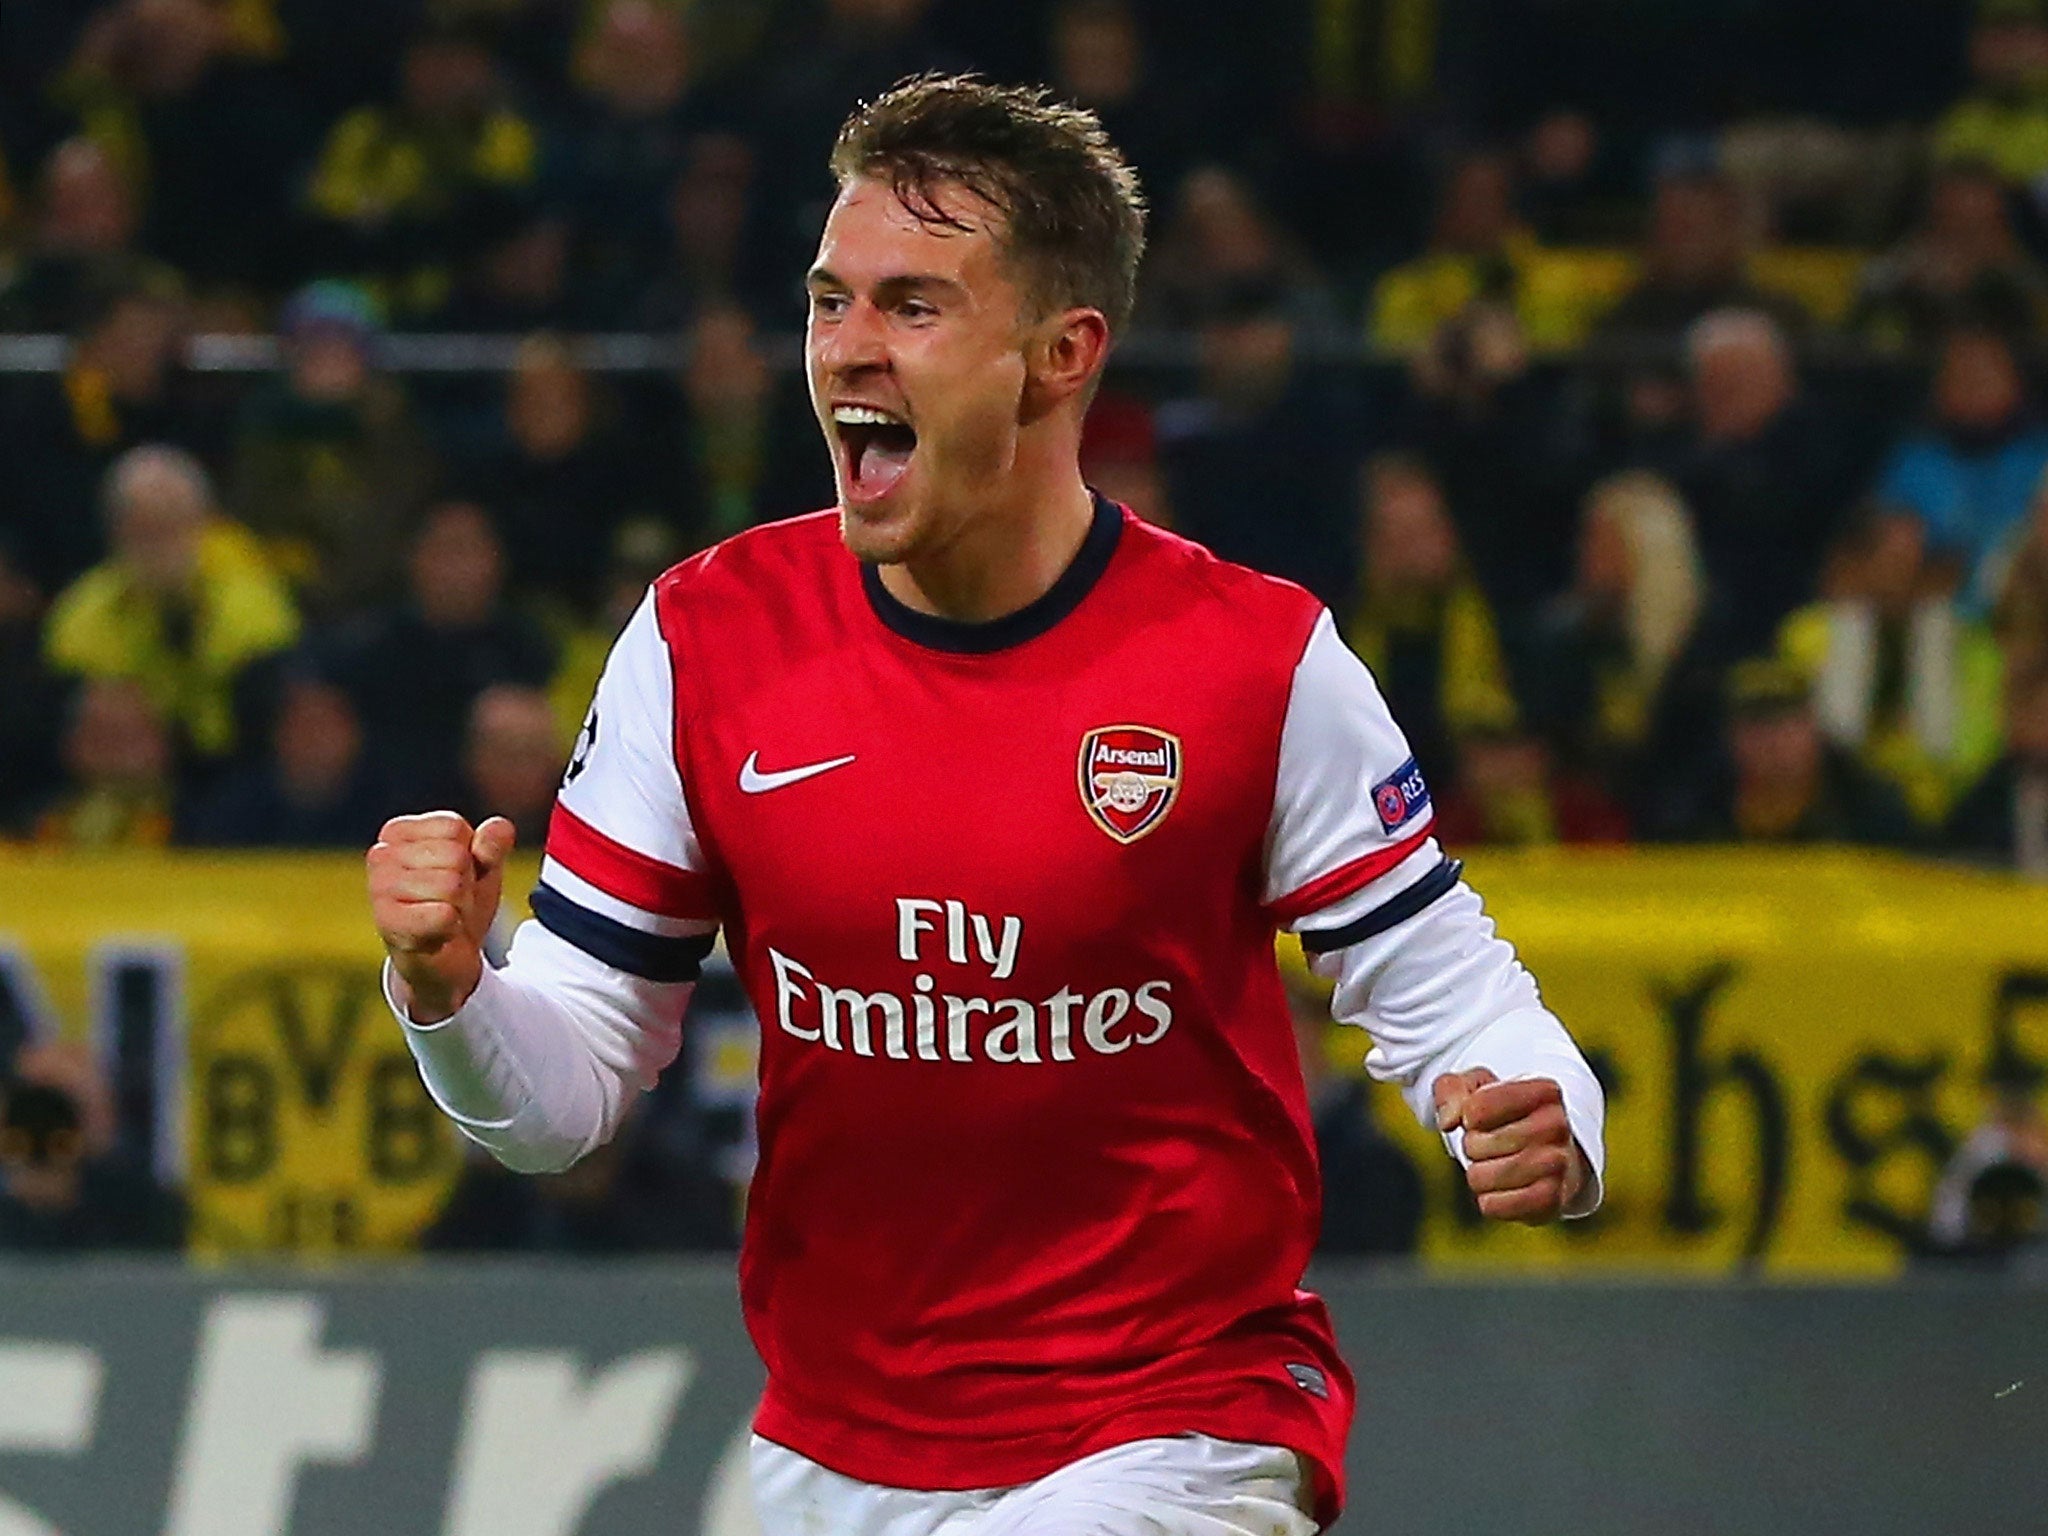 Arsenal midfielder Aaron Ramsey has claimed the Gunners have nothing to fear ahead of their trip to Manchester United